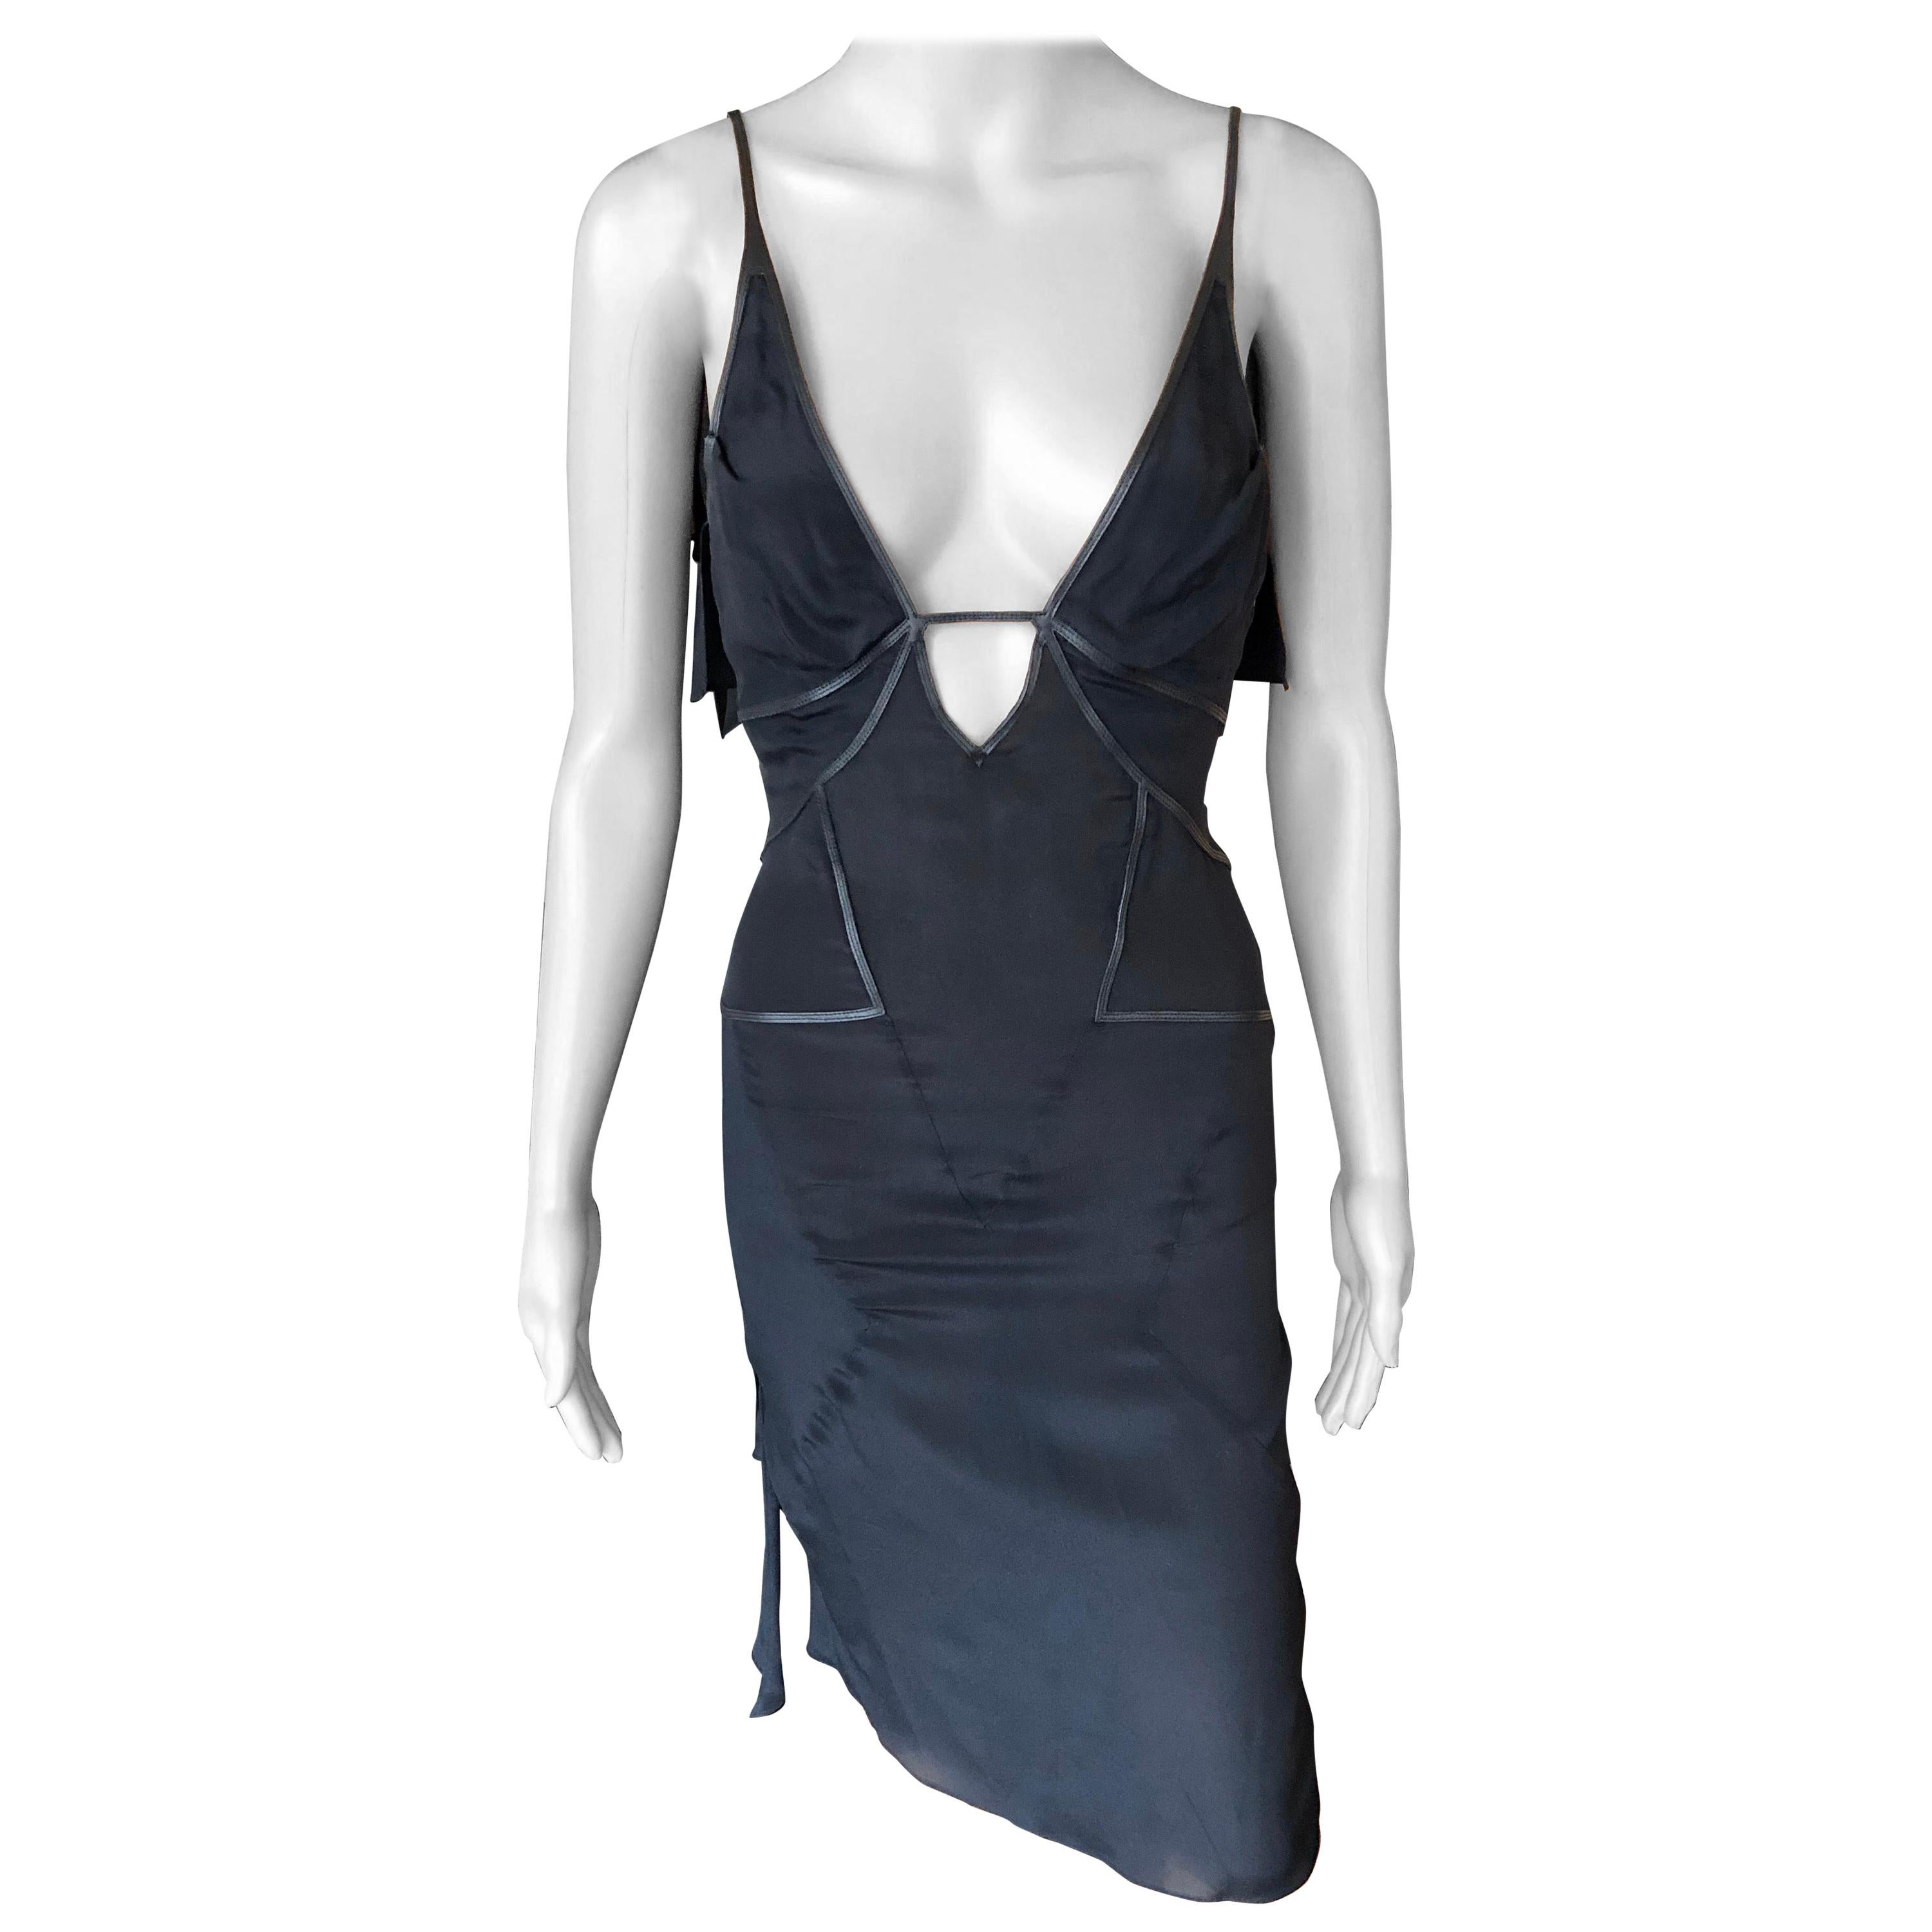 Gucci by Tom Ford S/S 2004 Cutout Plunged Neckline Black Dress